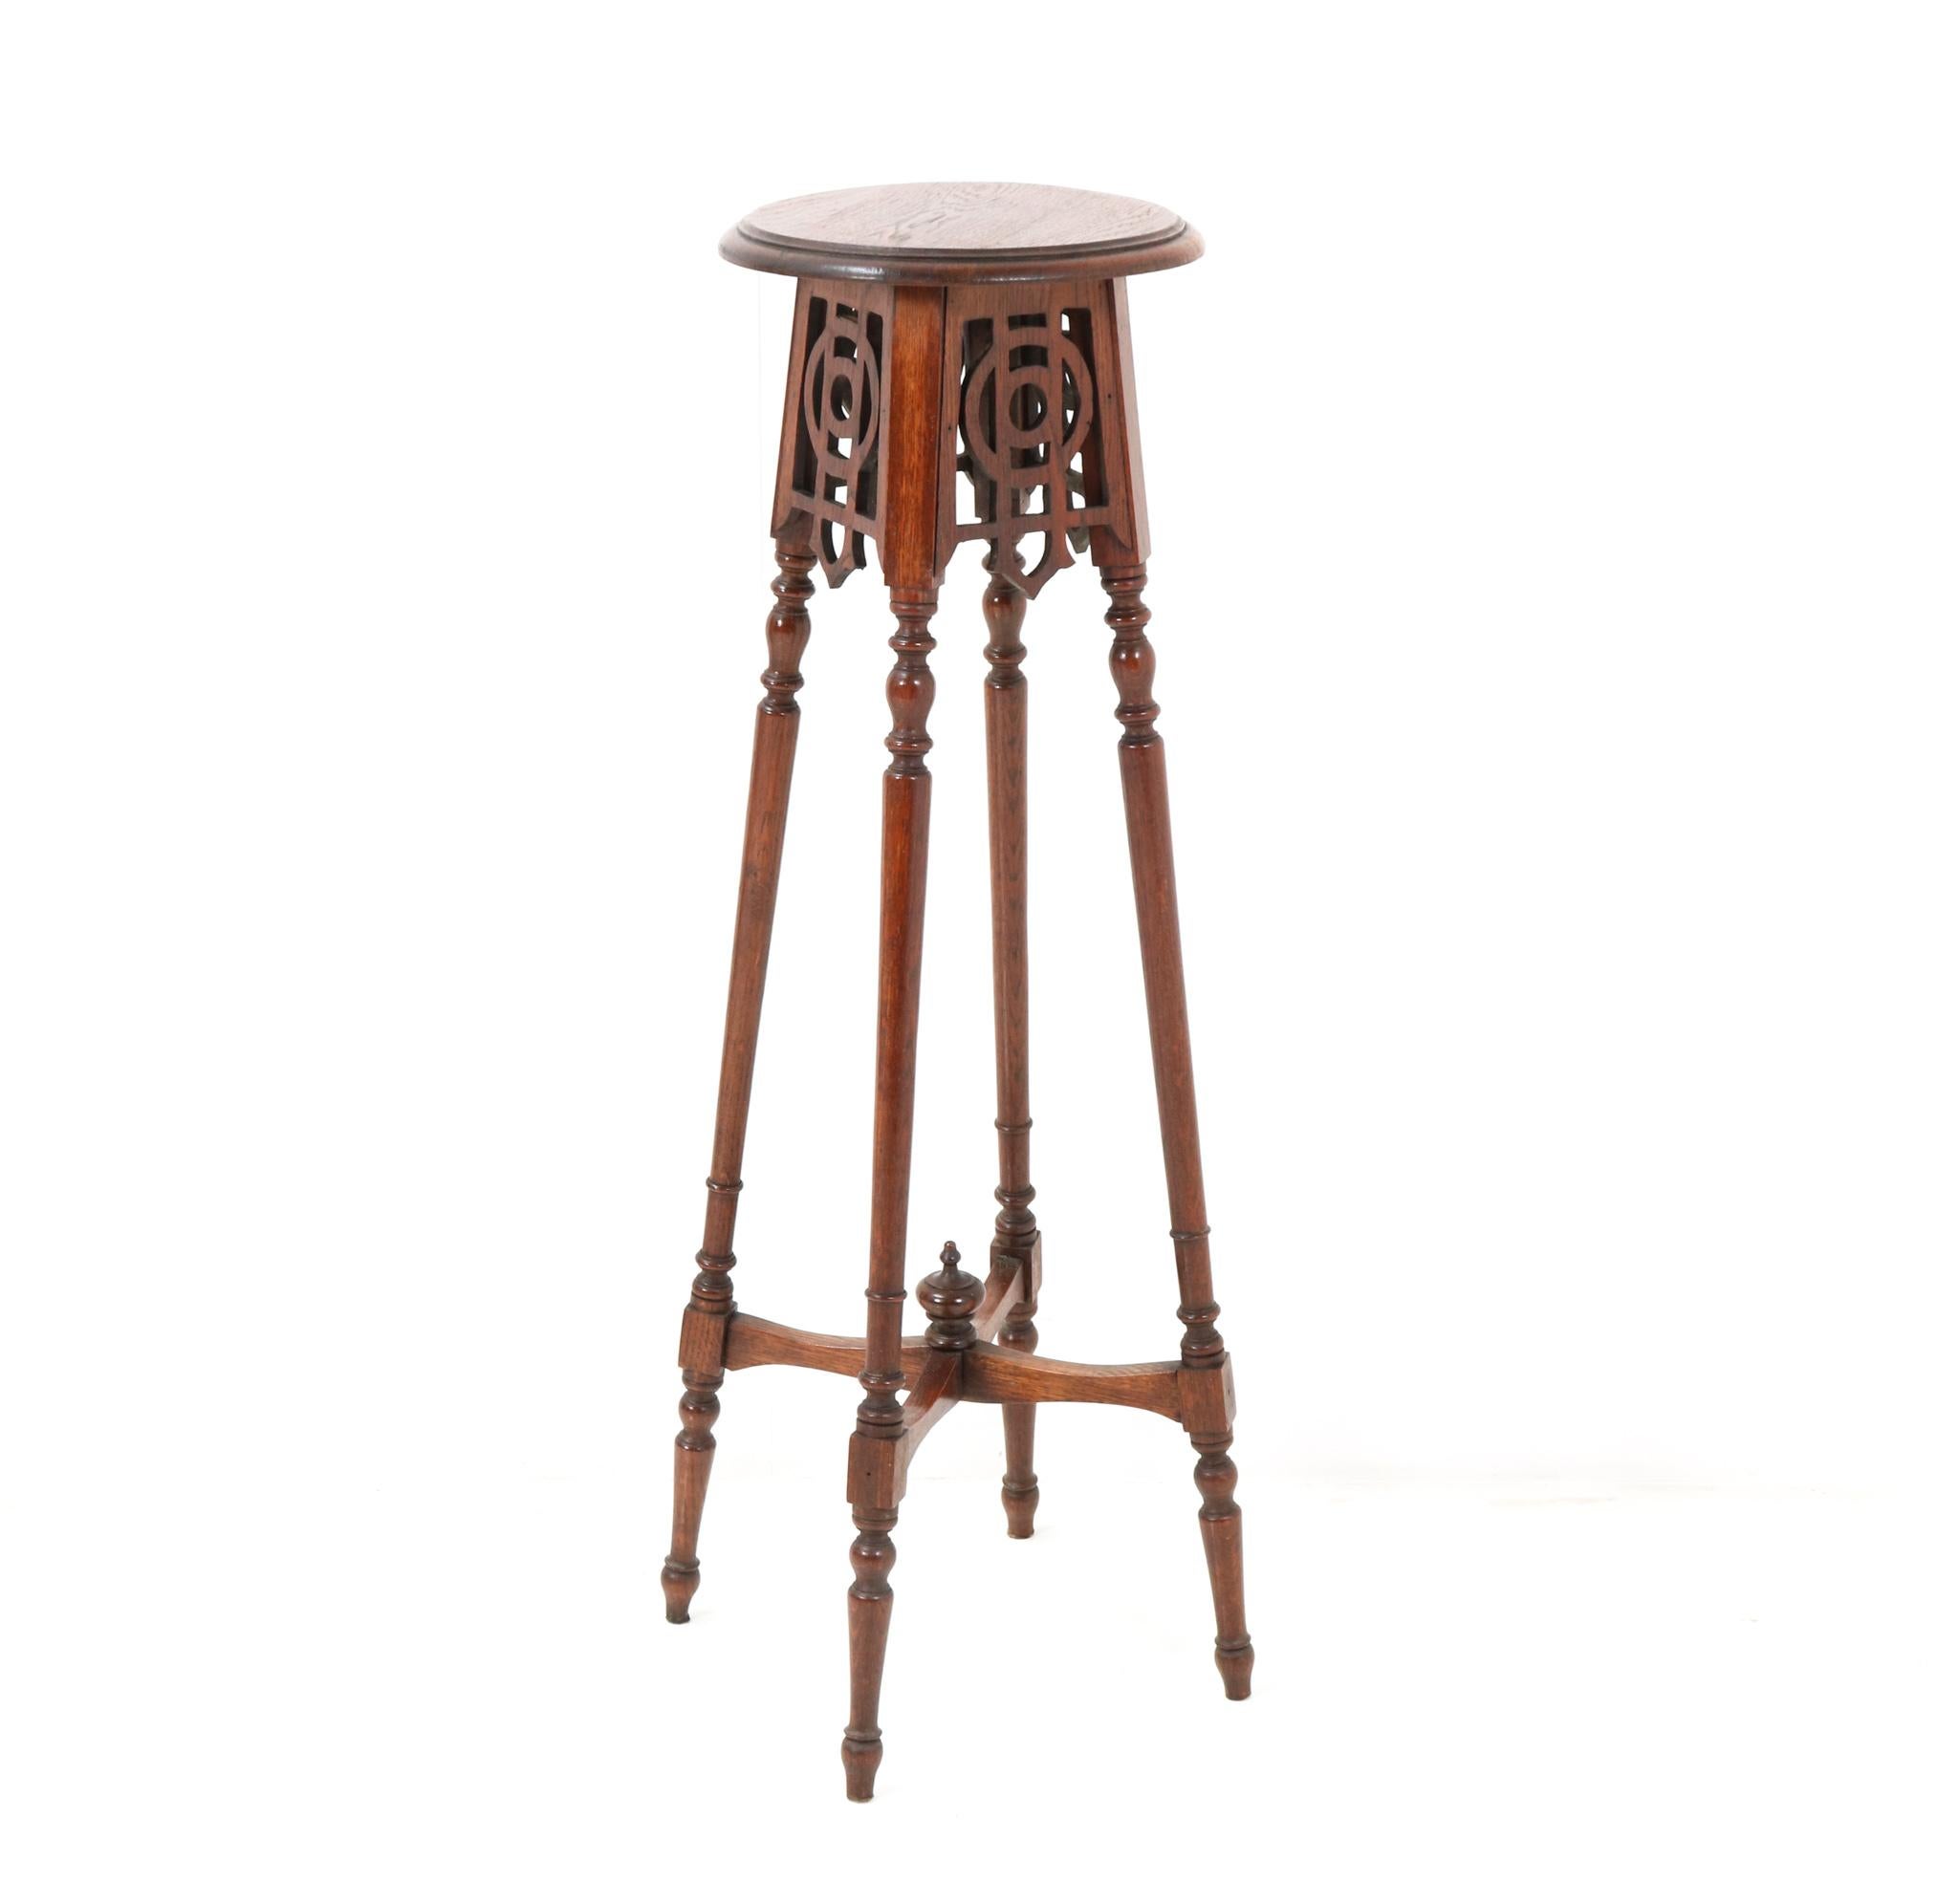 Magnificent and rare Art Nouveau pedestal table or plant stand.
Striking Dutch design from the 1900s.
Solid oak with original hand-carved elements.
This wonderful Art Nouveau pedestal table or plant stand will be a true eye catcher in your living